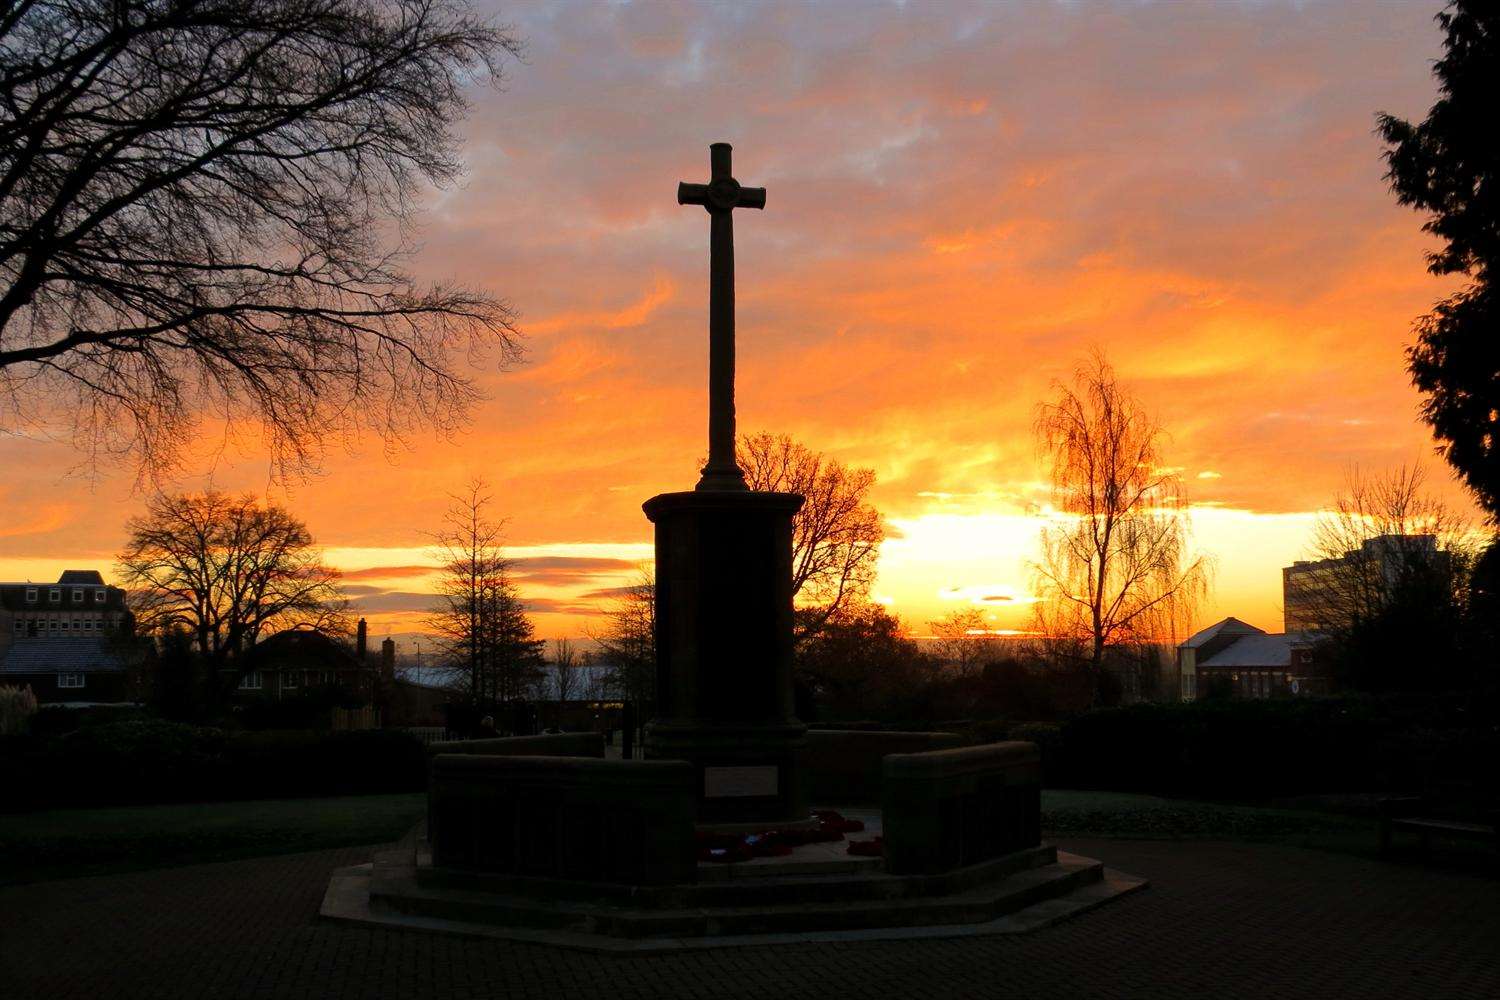 The war memorial in Ashford's Memorial Gardens - picture courtesy of Andy Clark